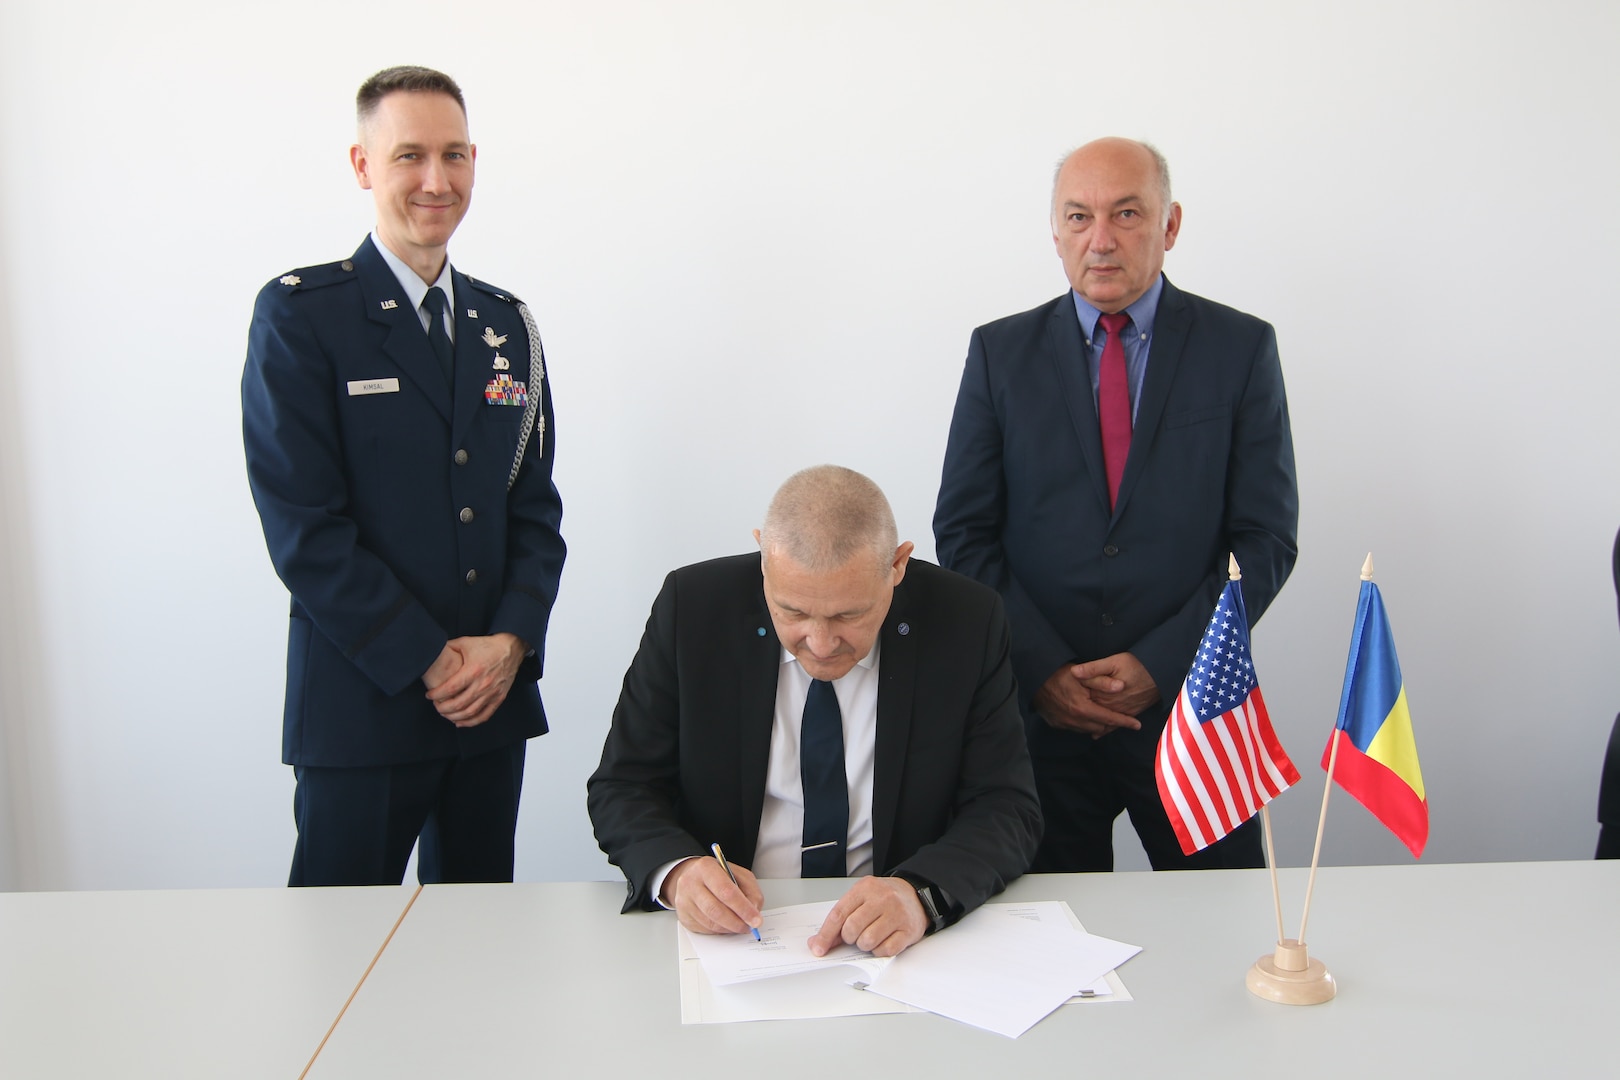 Dr. Phys. Marius-Ion Piso (center), President of Romanian Space Agency (ROSA), signs the United States-Romania Space Situational Awareness (SSA) agreement alongside Lt. Col. Matthew Kimsal (left), representative of the U.S. Embassy in Romania, and Mircea Cernat, Senior Engineer of ROSA, at ROSA headquarter in Bucharest, Romania, on April 25, 2019. The U.S. government partners with space-faring entities to promote the responsible, peaceful and safe use of space. SSA sharing agreements lay the foundation that allows USSTRATCOM to share information with allies and partners in support of launches, on-orbit maneuvers, anomaly resolution, de-commissioning activities and on-orbit conjunction assessments. SSA sharing is a foundational capability that affects all future space operations and projects.